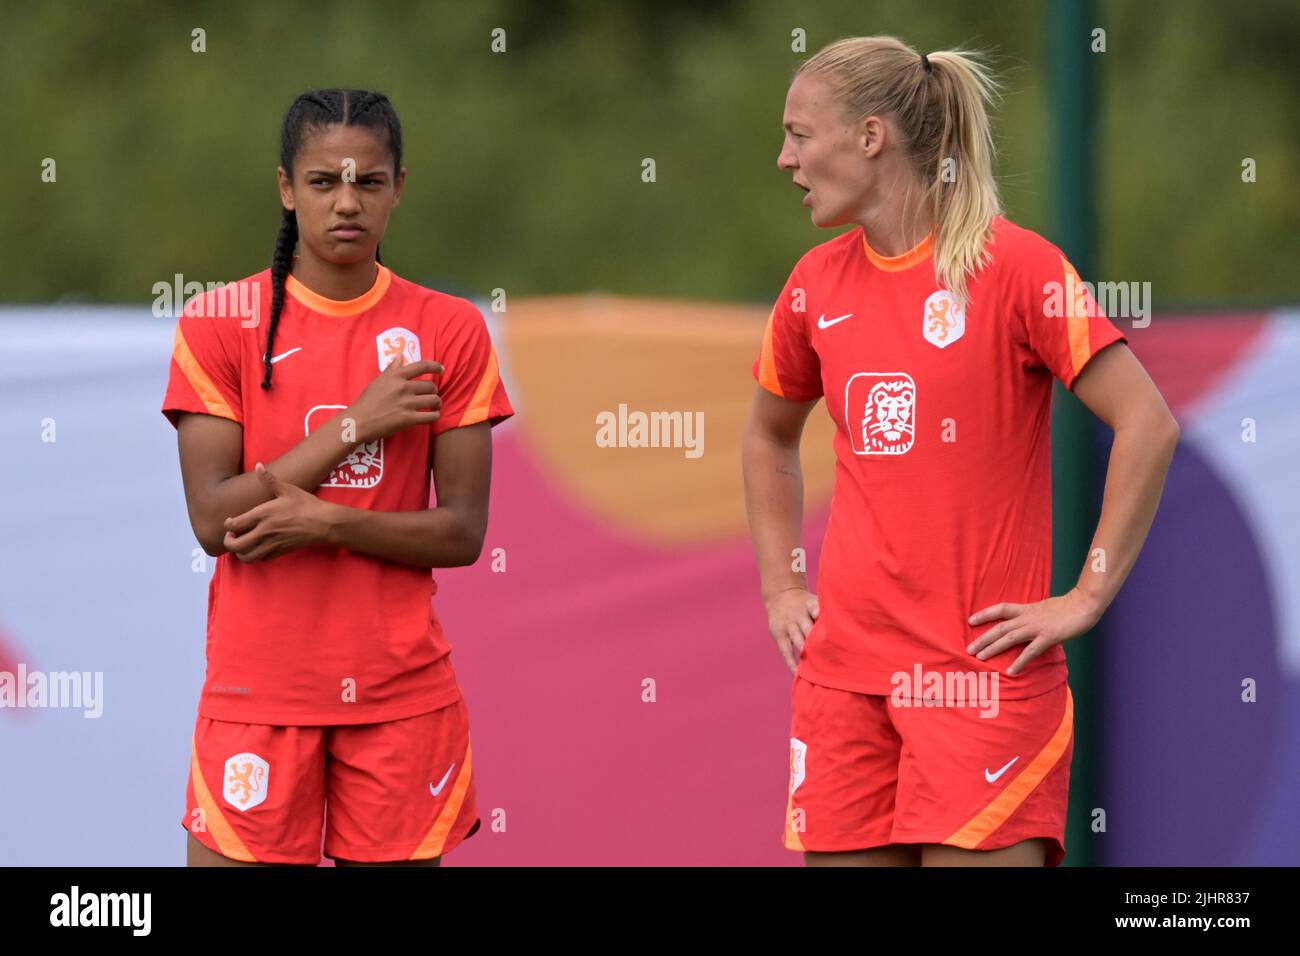 STOCKPORT - UK, 20/07/2022, (lr) Esmee Brugts of Holland women , Stefanie van der Gragt of Holland women during a training session of the Netherlands women's national team on July 20, 2022 at Stockport County FC in Stockport prior to the UEFA Women's EURO England 2022 game against France. ANP GERRIT VAN COLOGNE Stock Photo